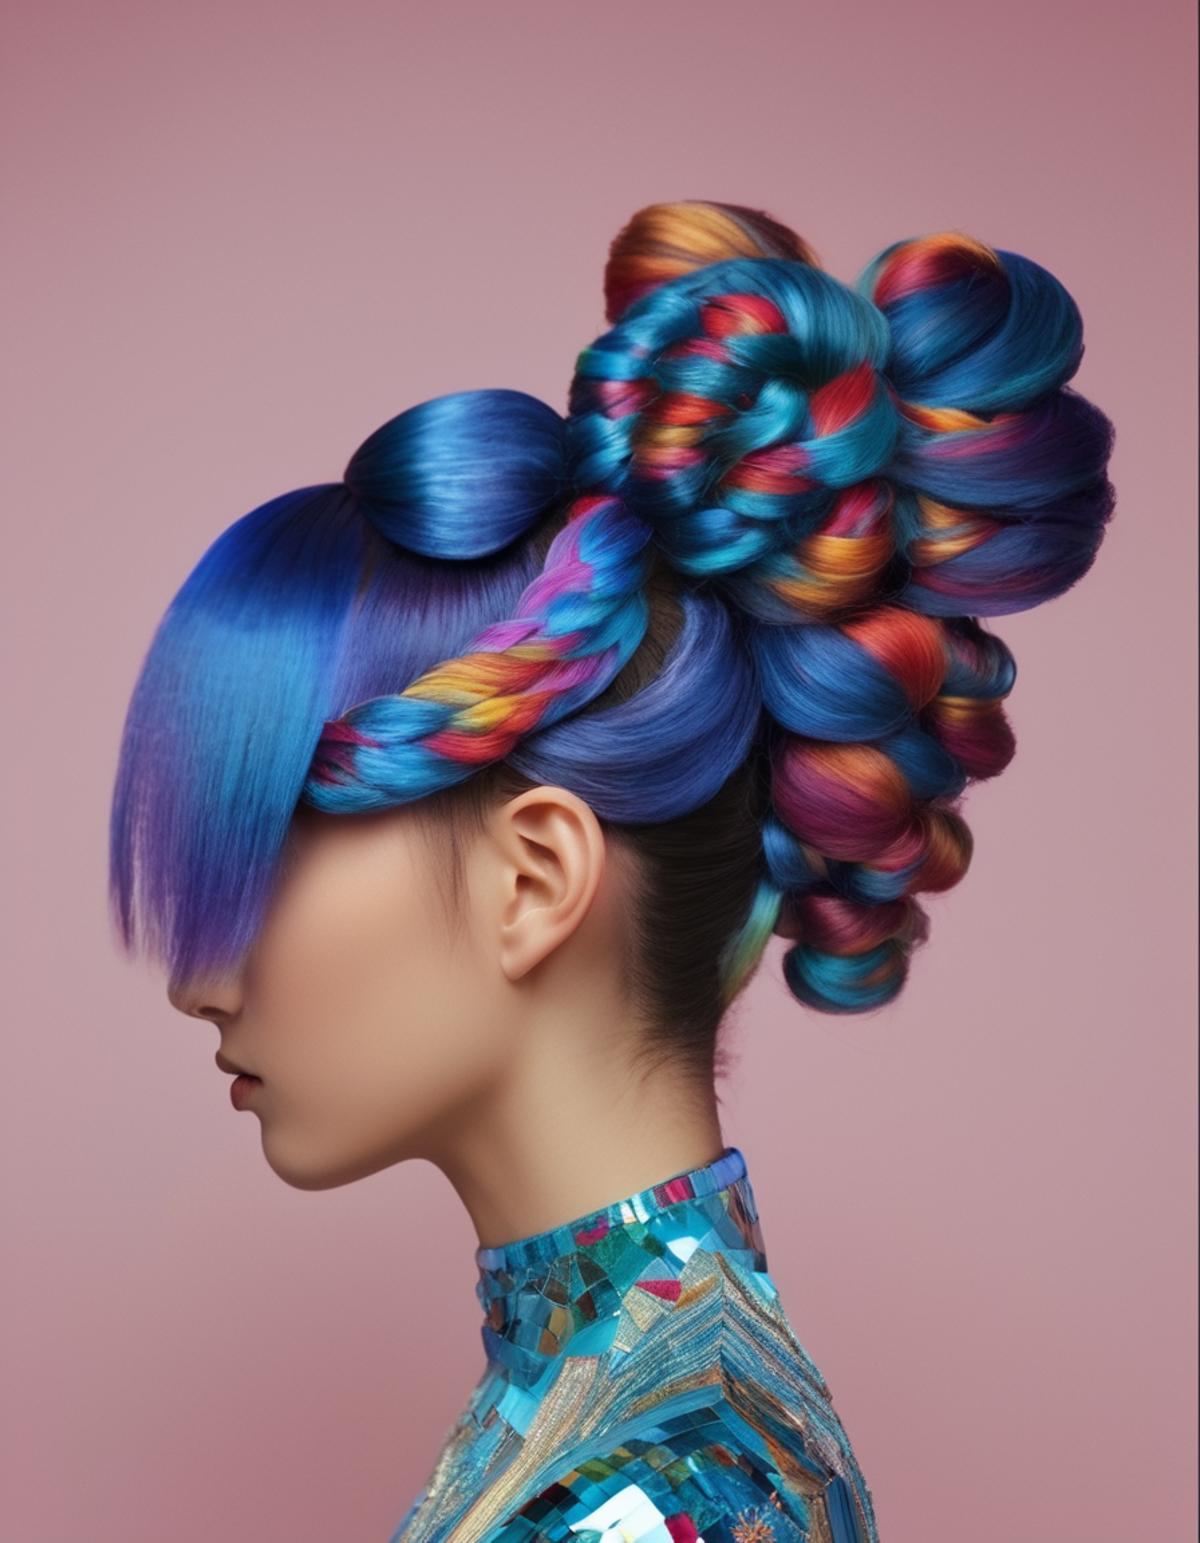 Hair Style image by aihonobono2023